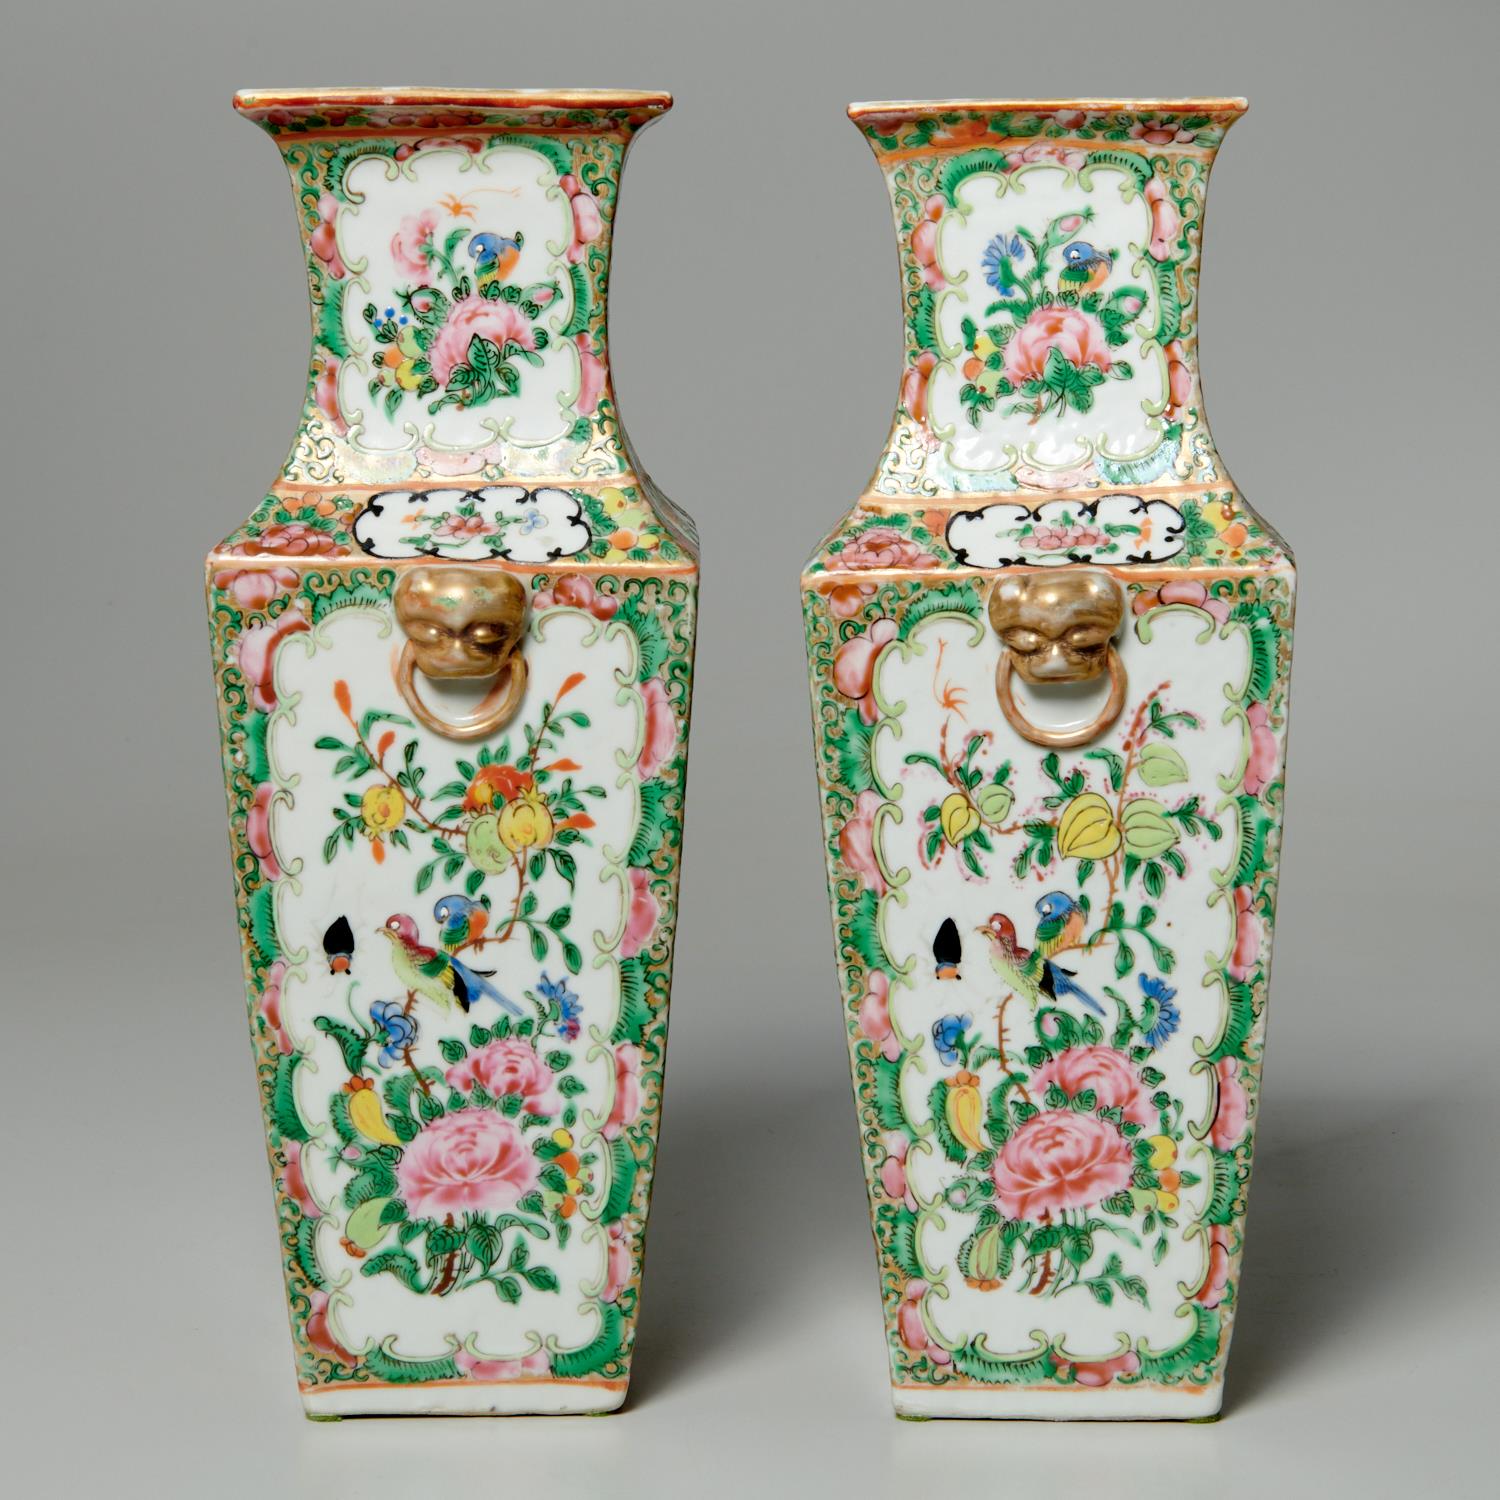 PAIR CHINESE PORCELAIN VASES EX 361cde